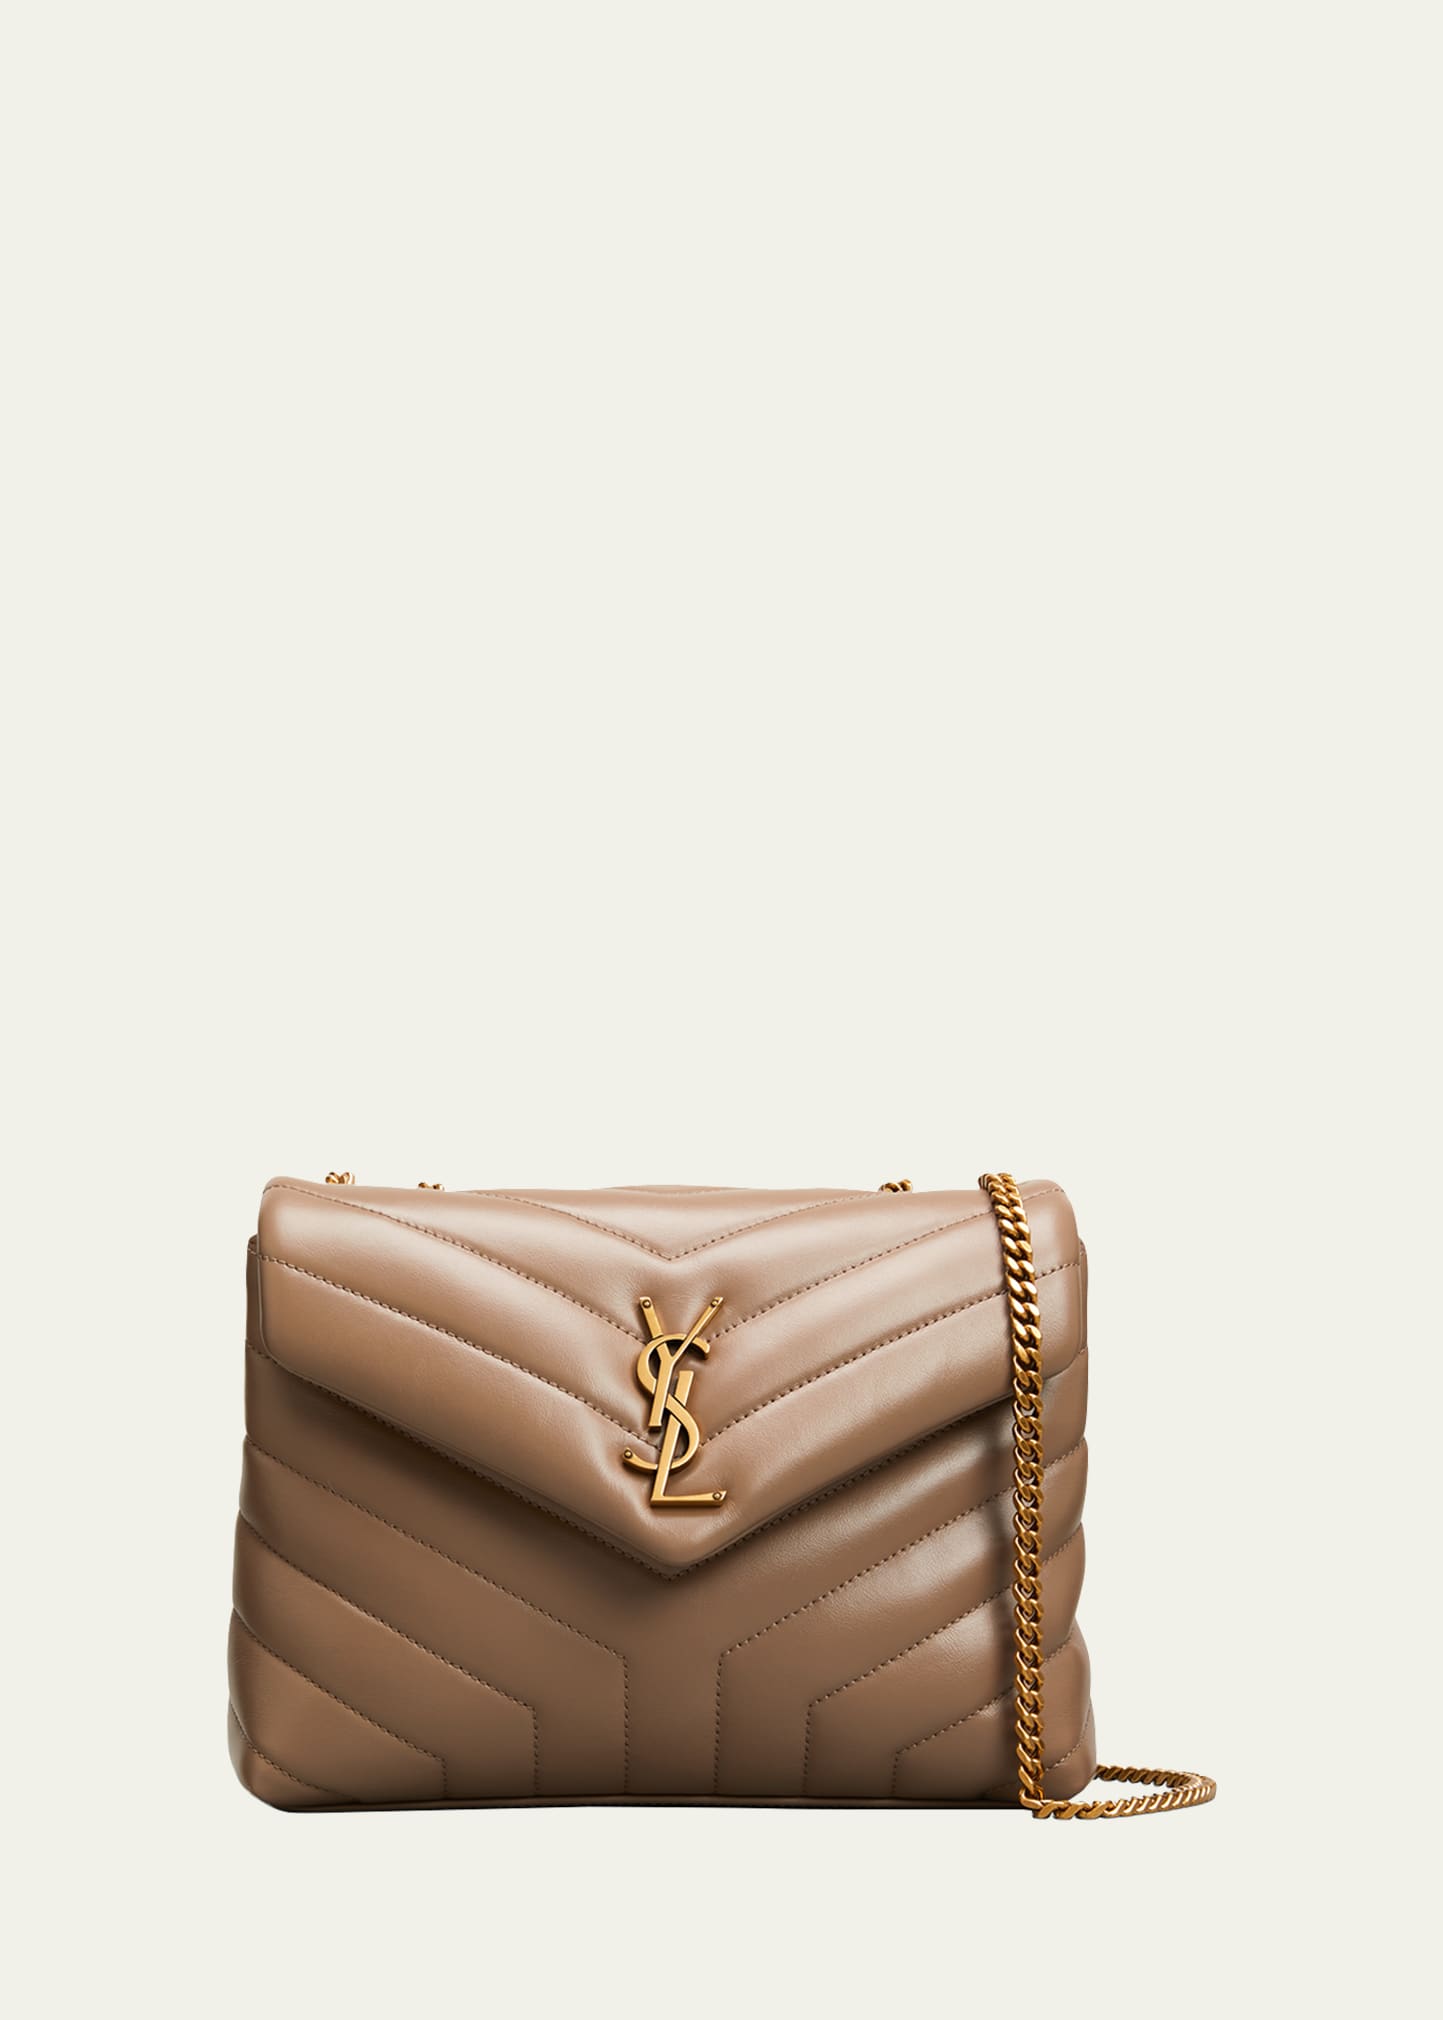 Saint Laurent Small Satchel Quilted Leather Cross-body Bag in Natural